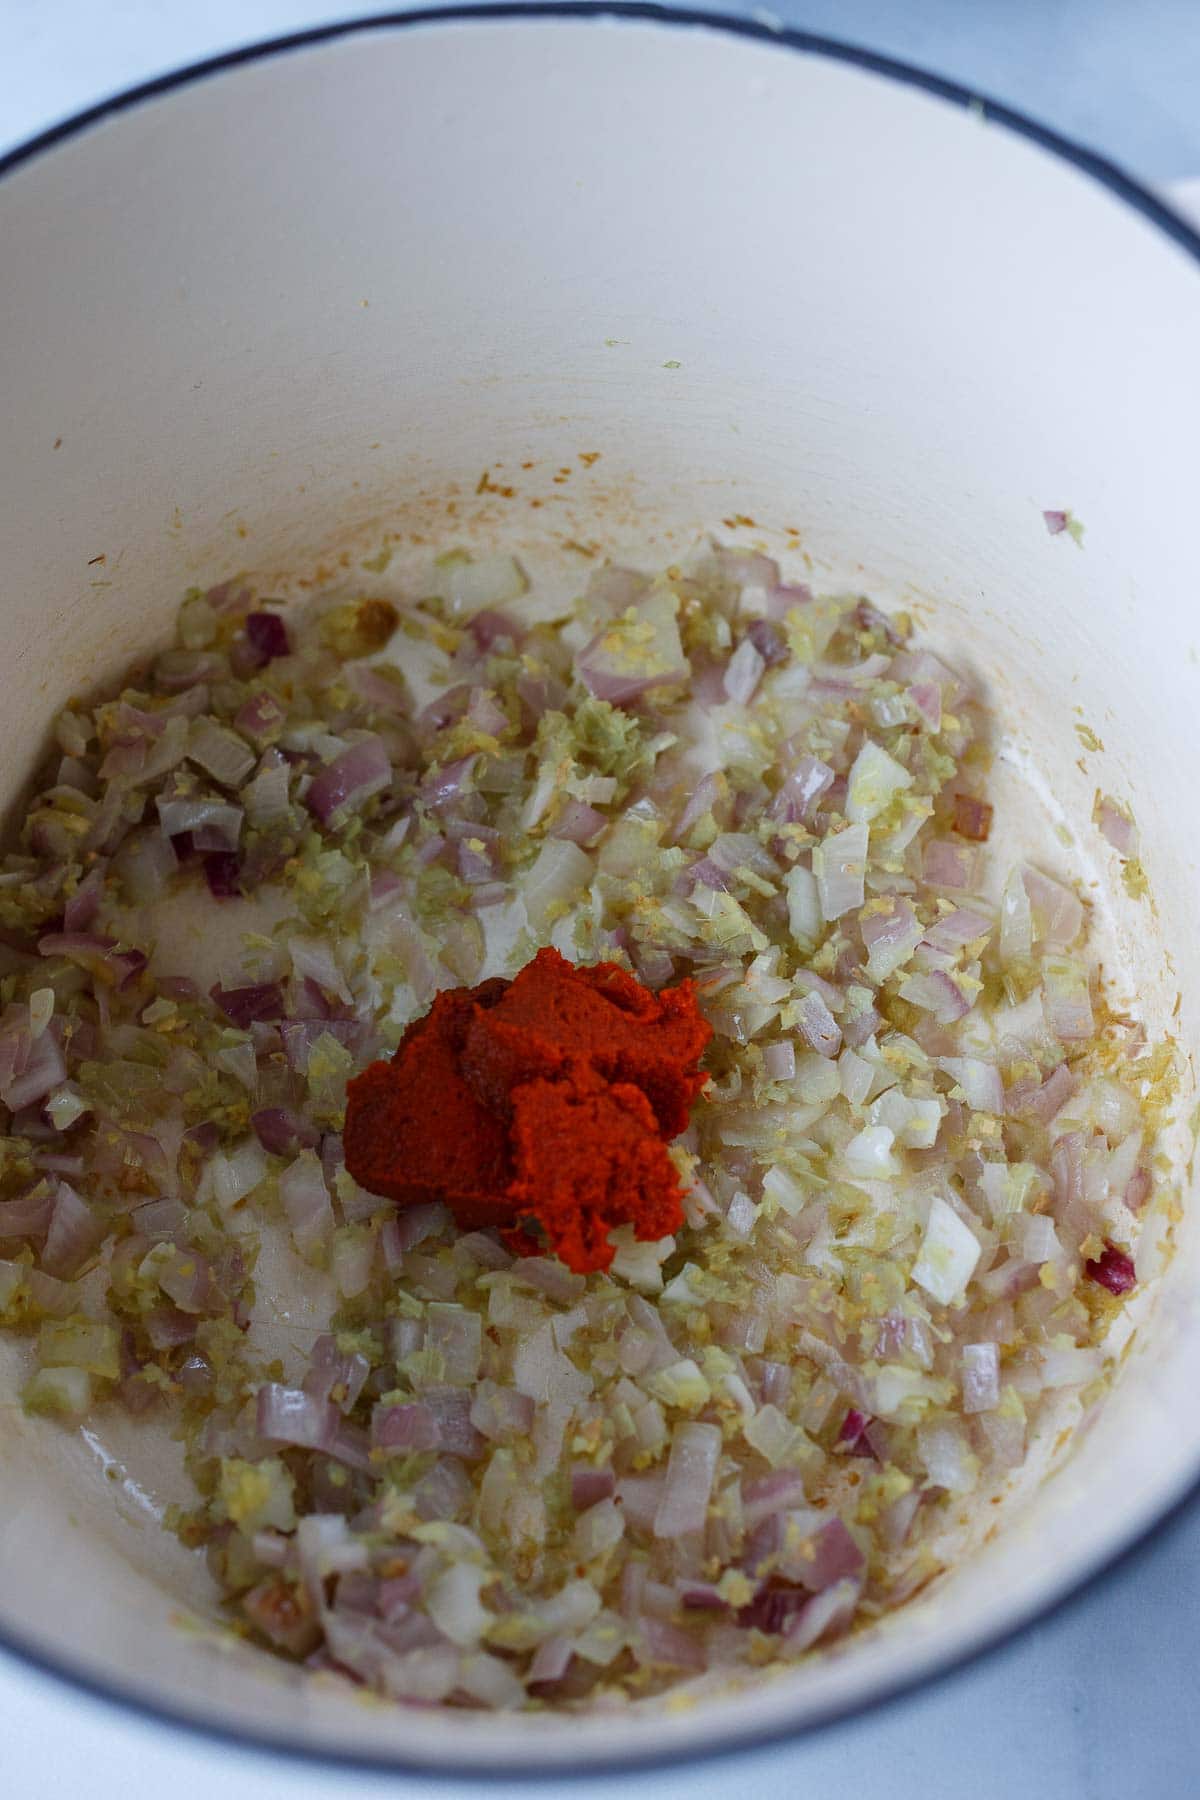 Red curry paste, shallots, ginger, and lemongrass sauteing for pumpkin curry.